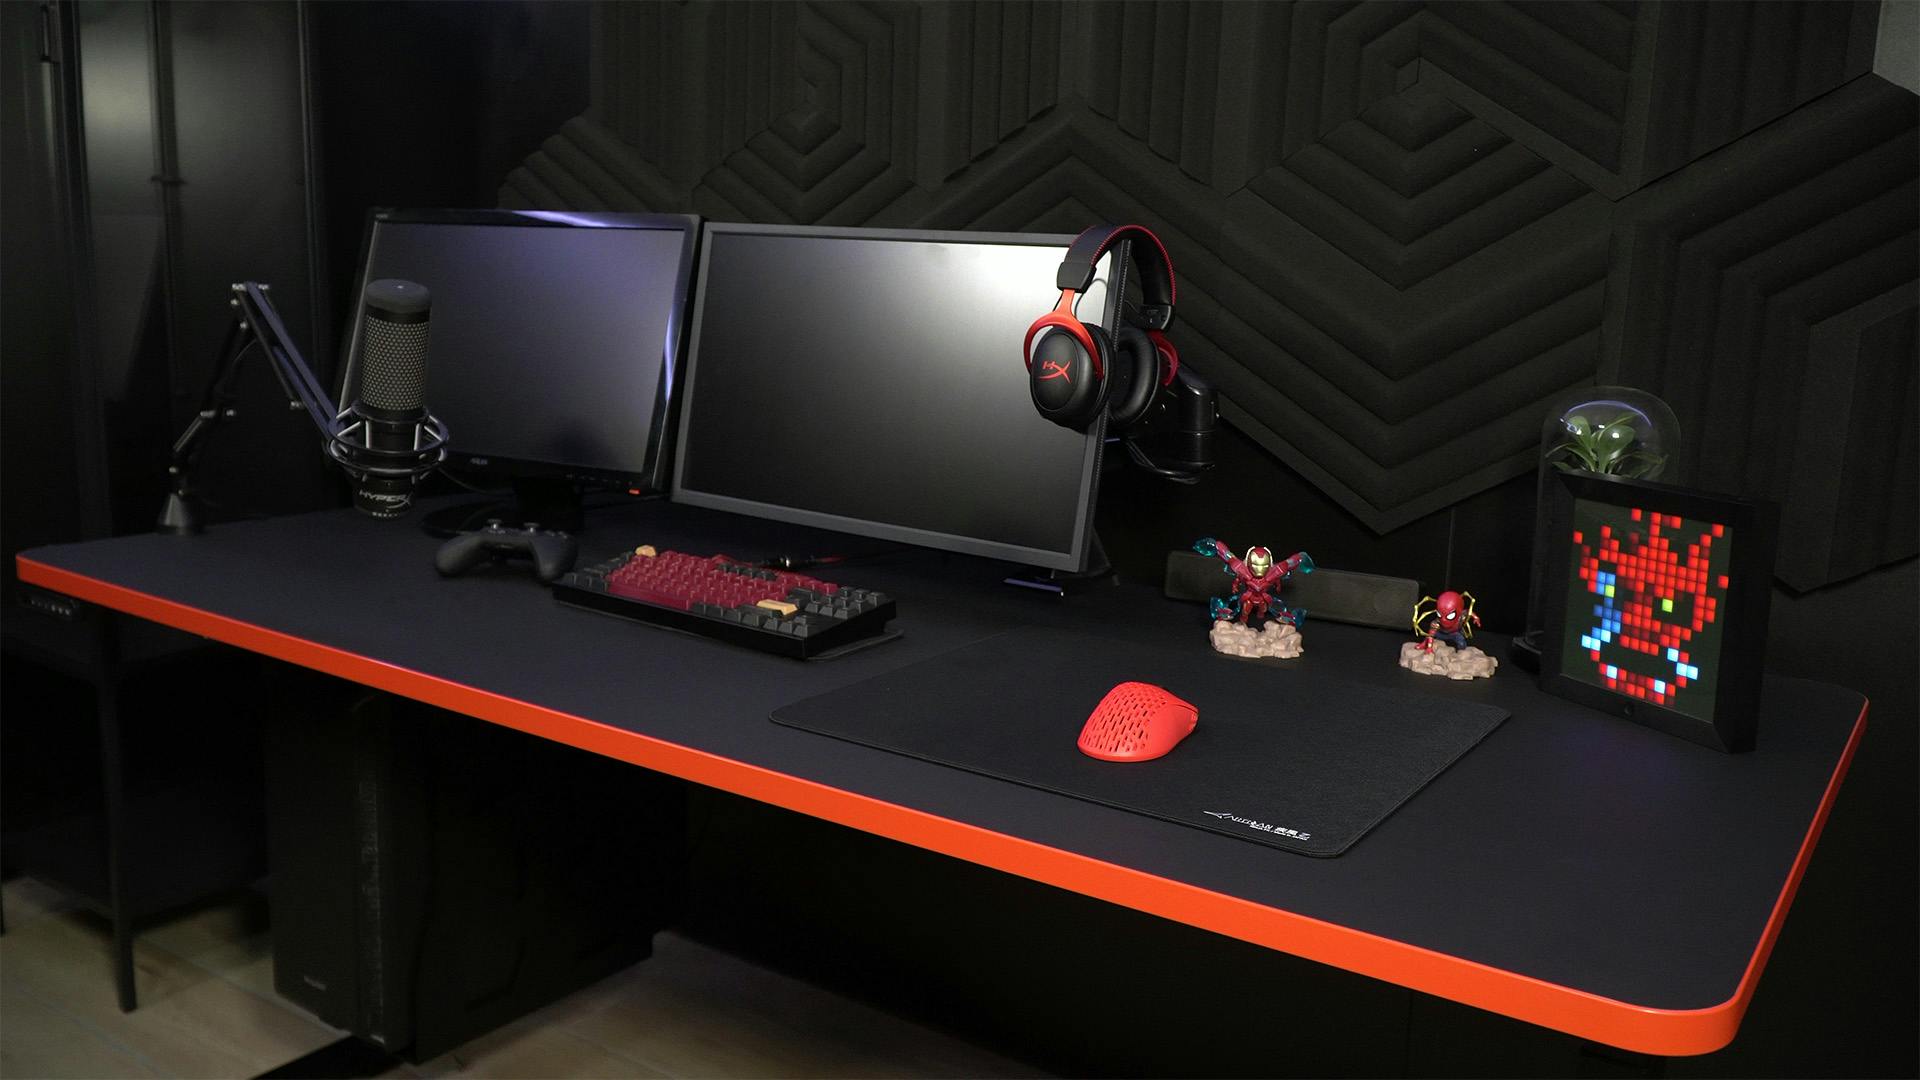 https://images.prismic.io/leetdesk/7935ce43-44aa-486d-9281-259312fa2e7c_red-gaming-setup-cable-management.jpg?auto=compress,format